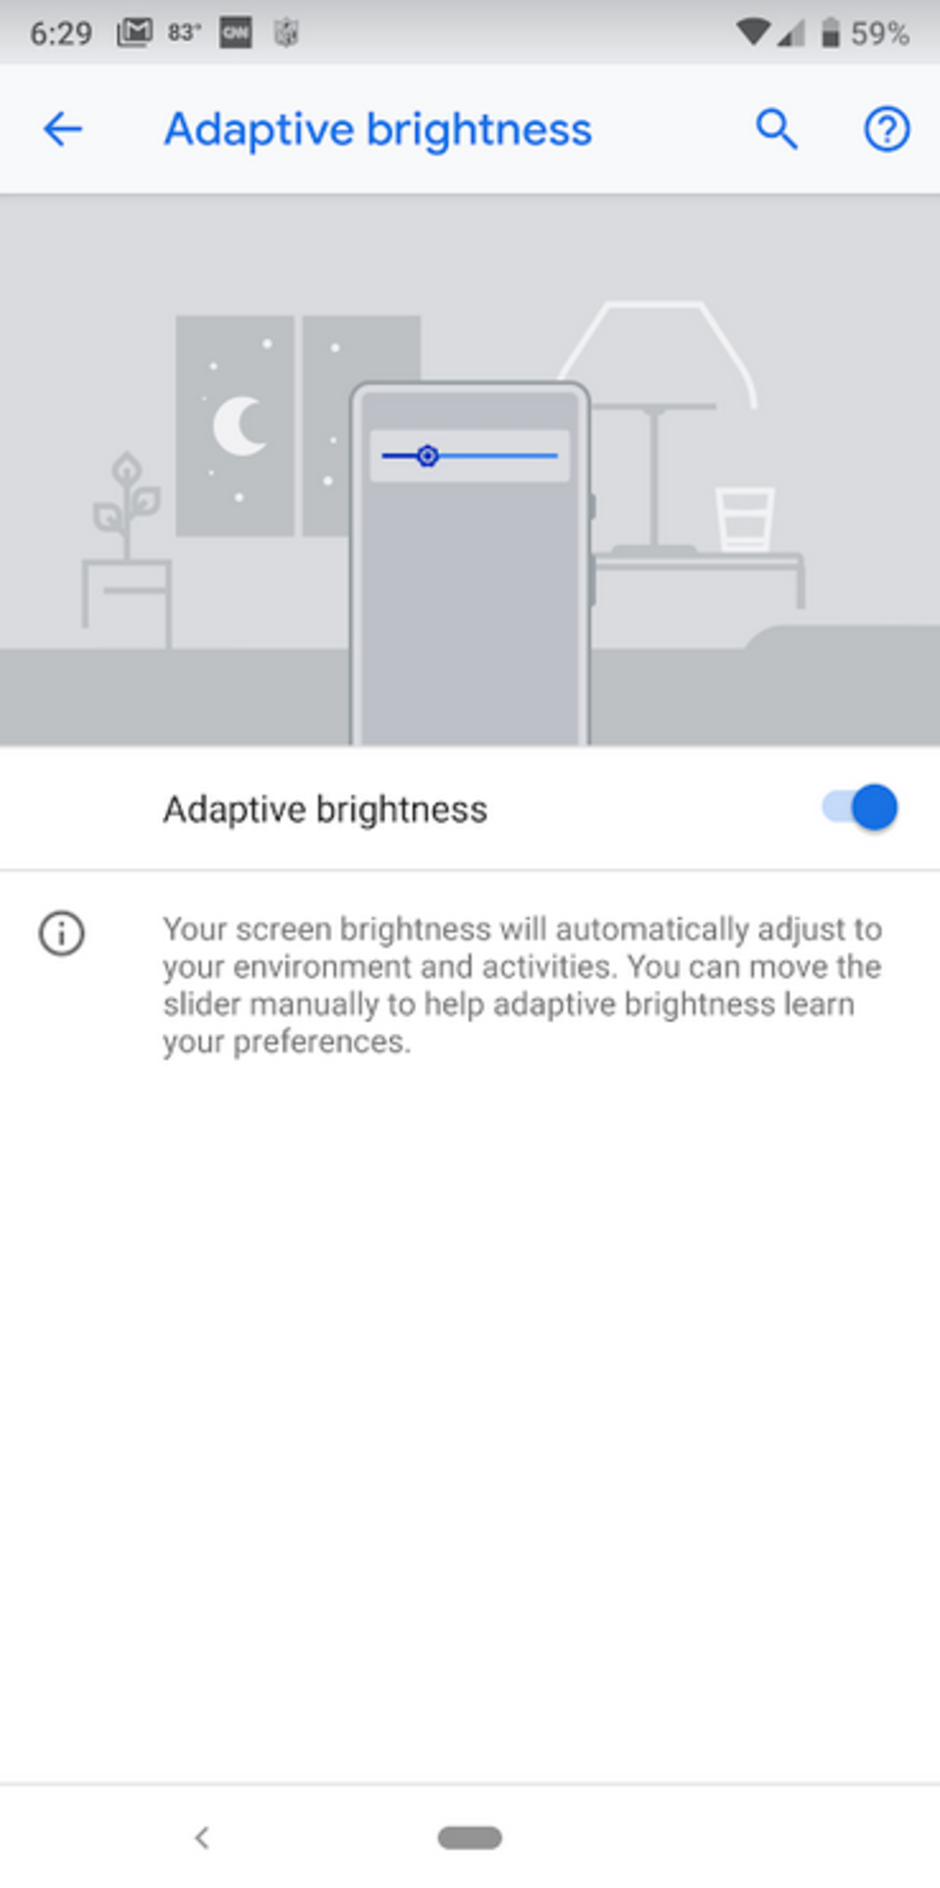 Adaptive brightness feature on Android 9 Pie - Simple fix could help you get an Android 9 feature working again on a Pixel handset